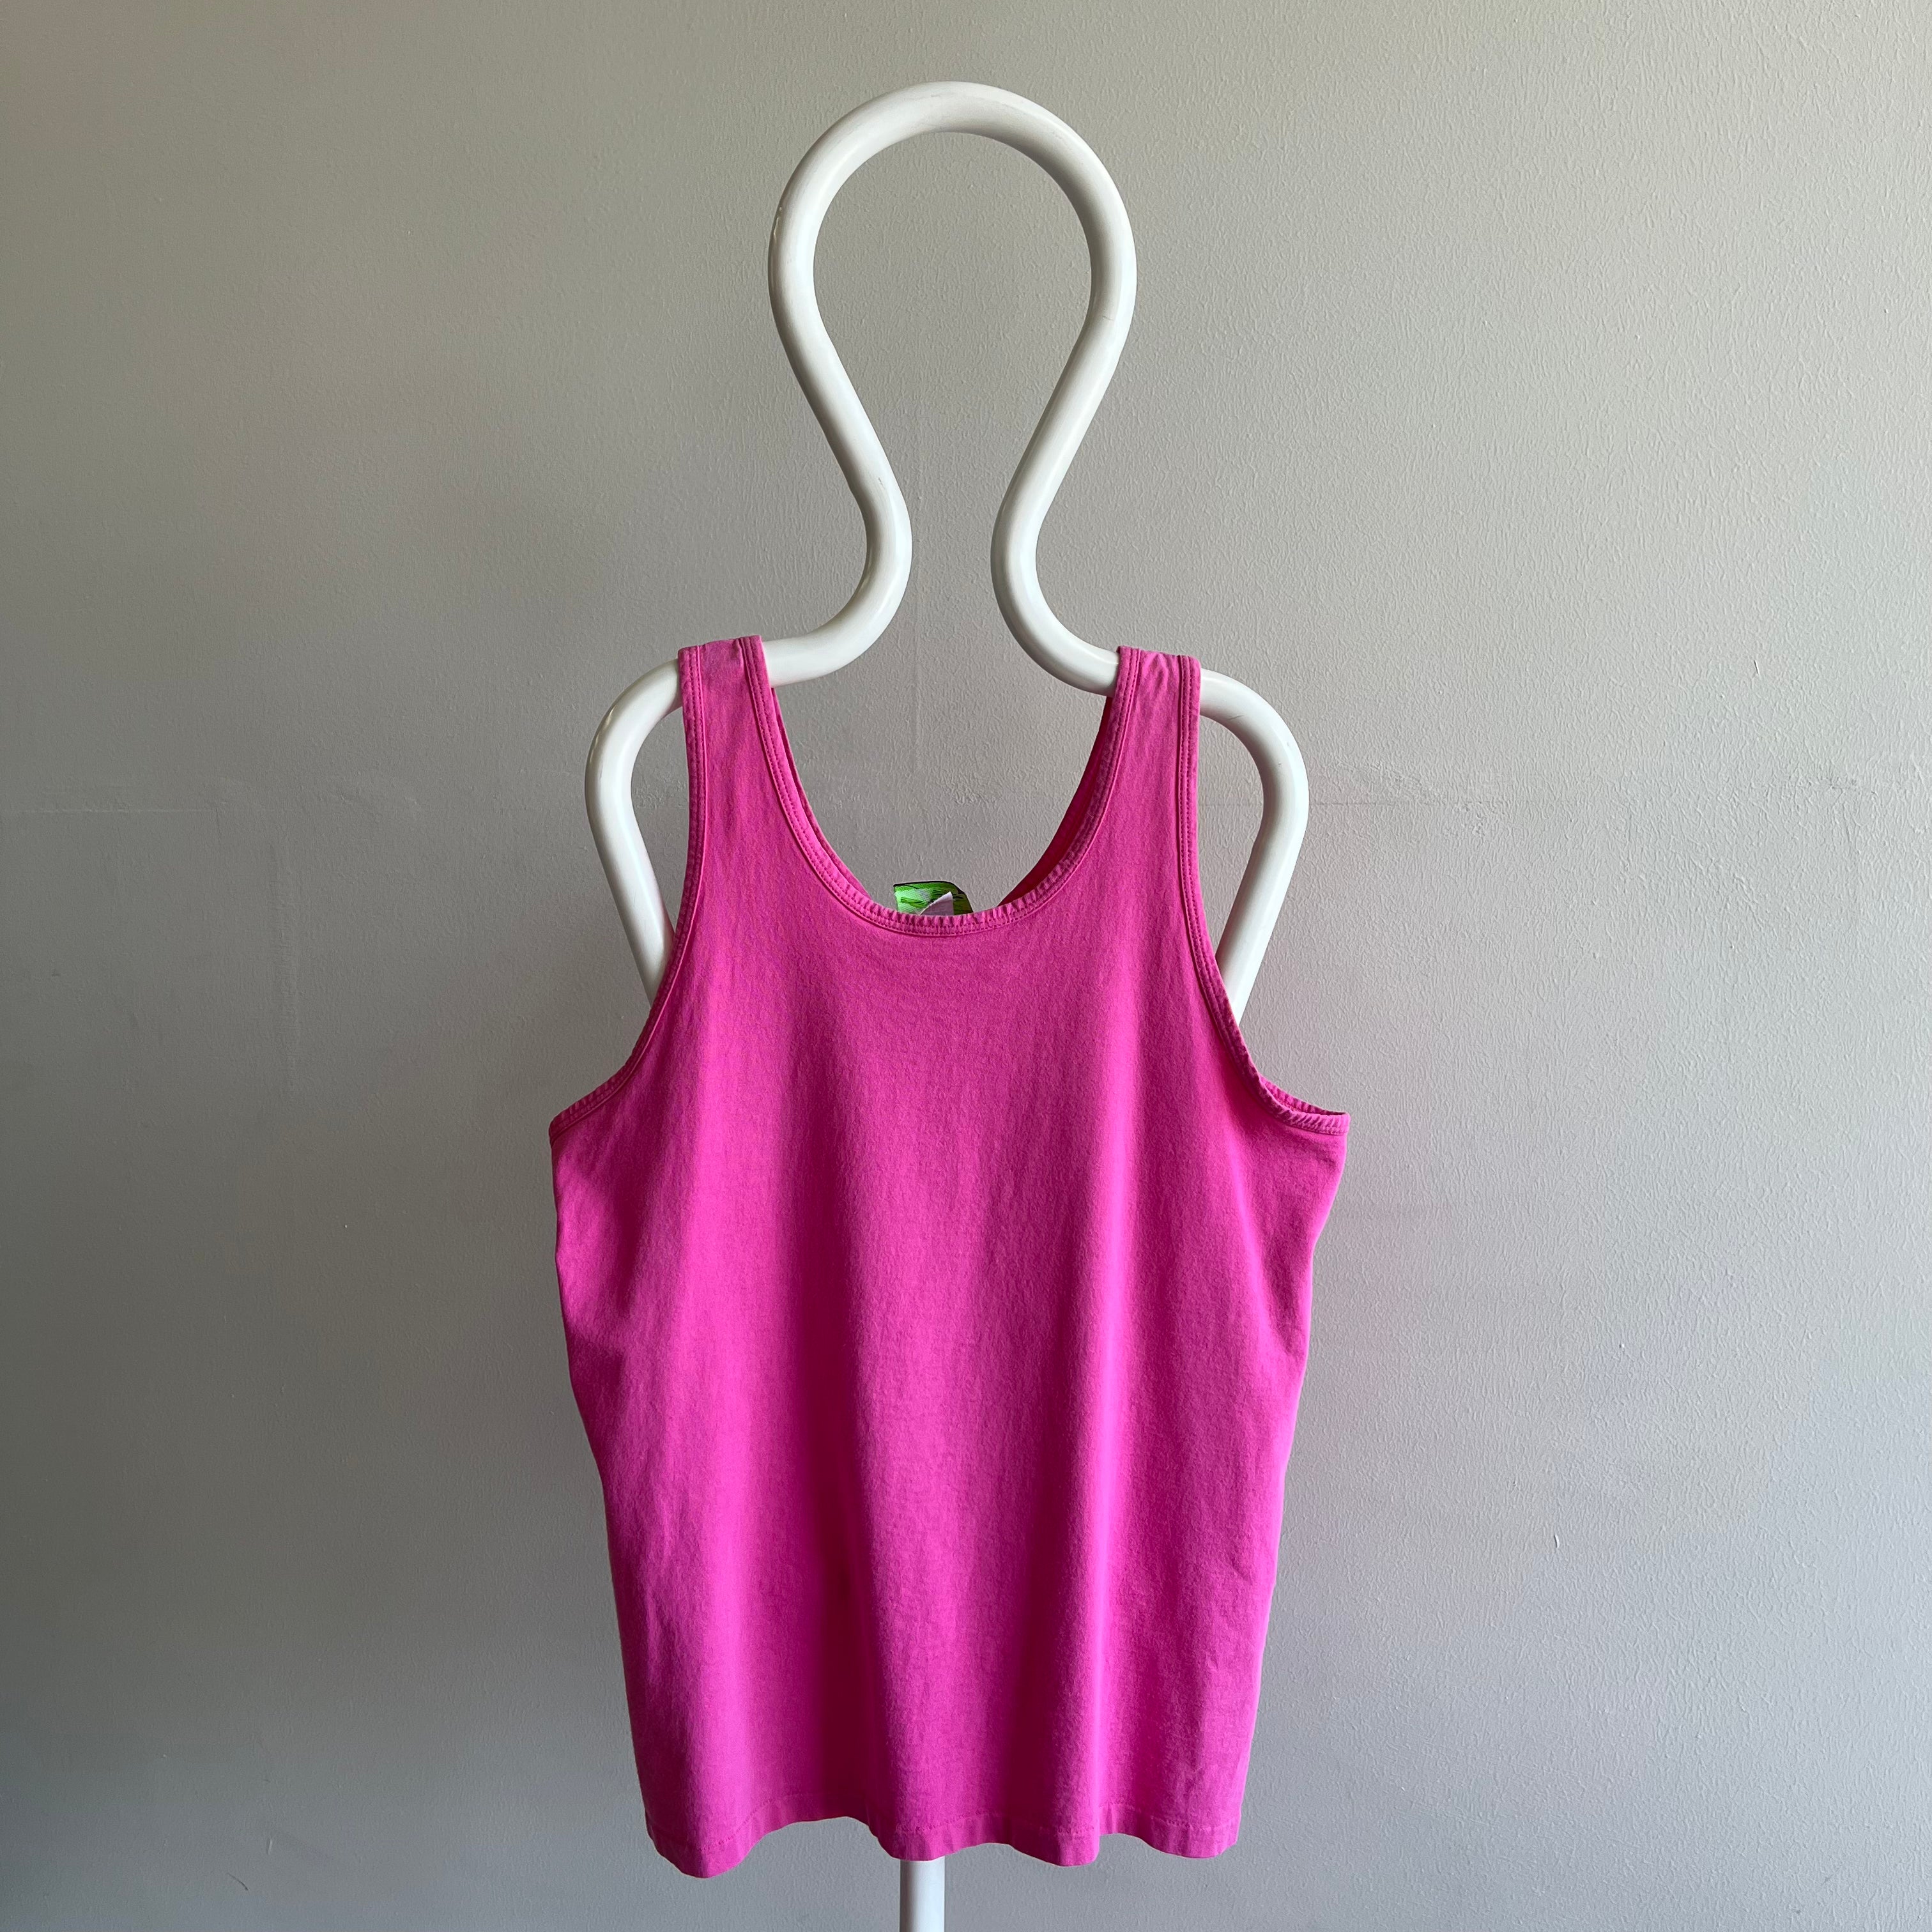 1980s Hot Pink Cotton Tank Top